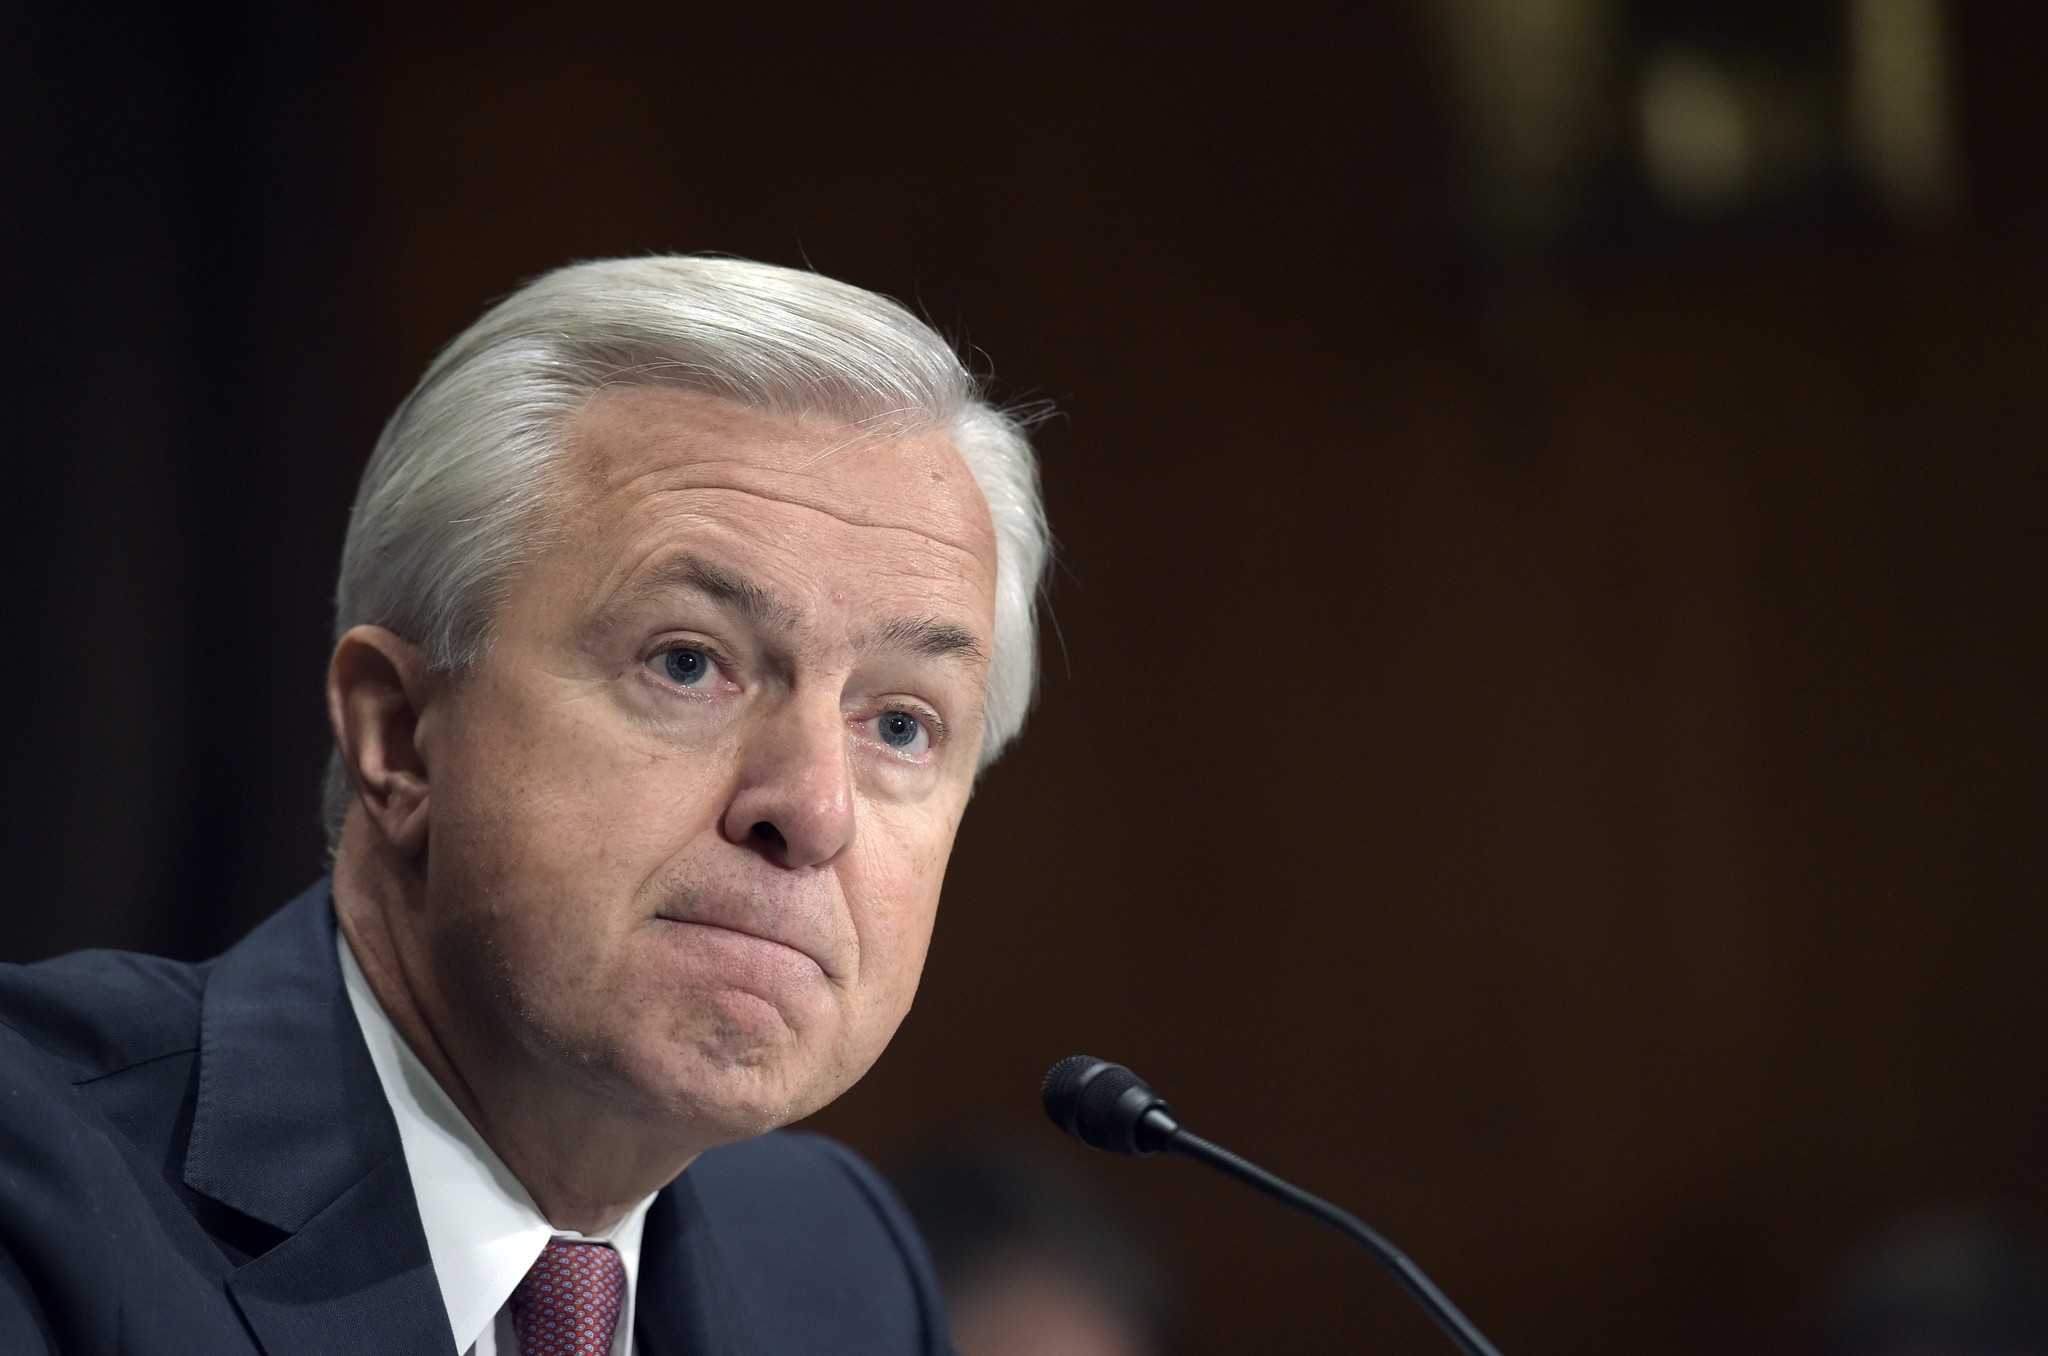  In this Tuesday, Sept. 20, 2016, file photo, Wells Fargo CEO John Stumpf testifies on Capitol Hill in Washington, before the Senate Banking Committee. (AP Photo)